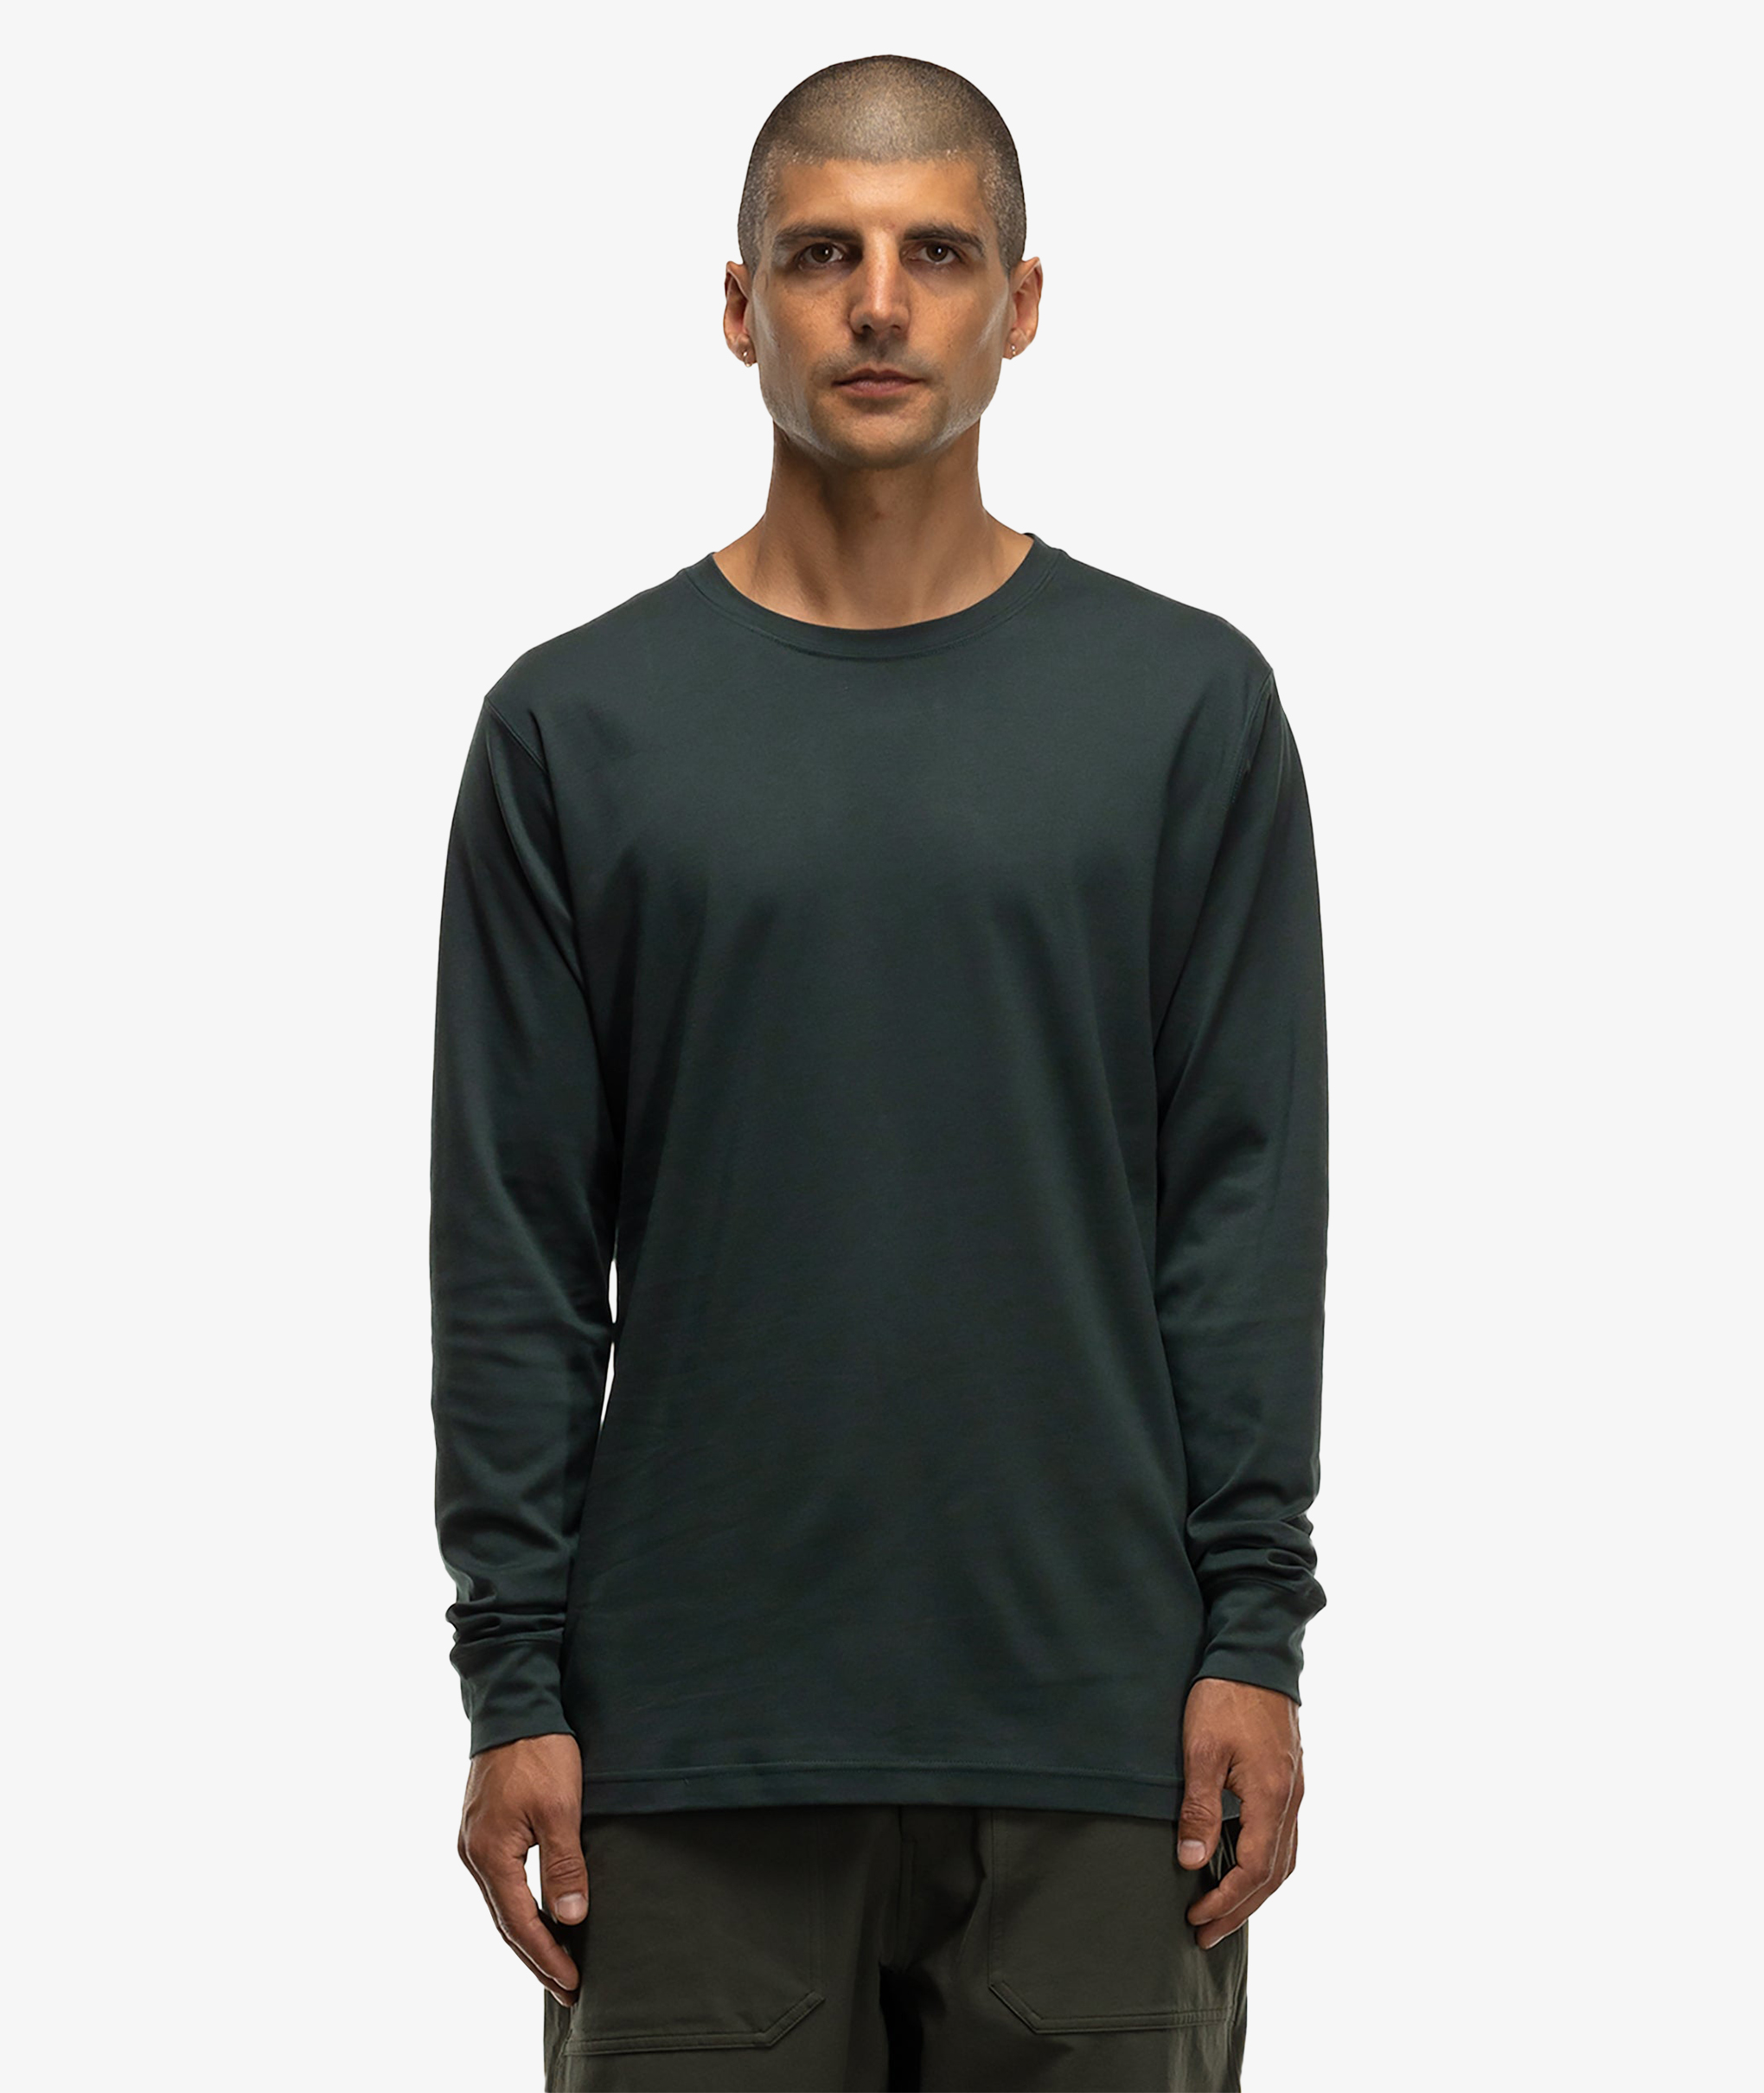 Norse Store | Shipping Worldwide - Haven Prime T-Shirt L/S - Spruce